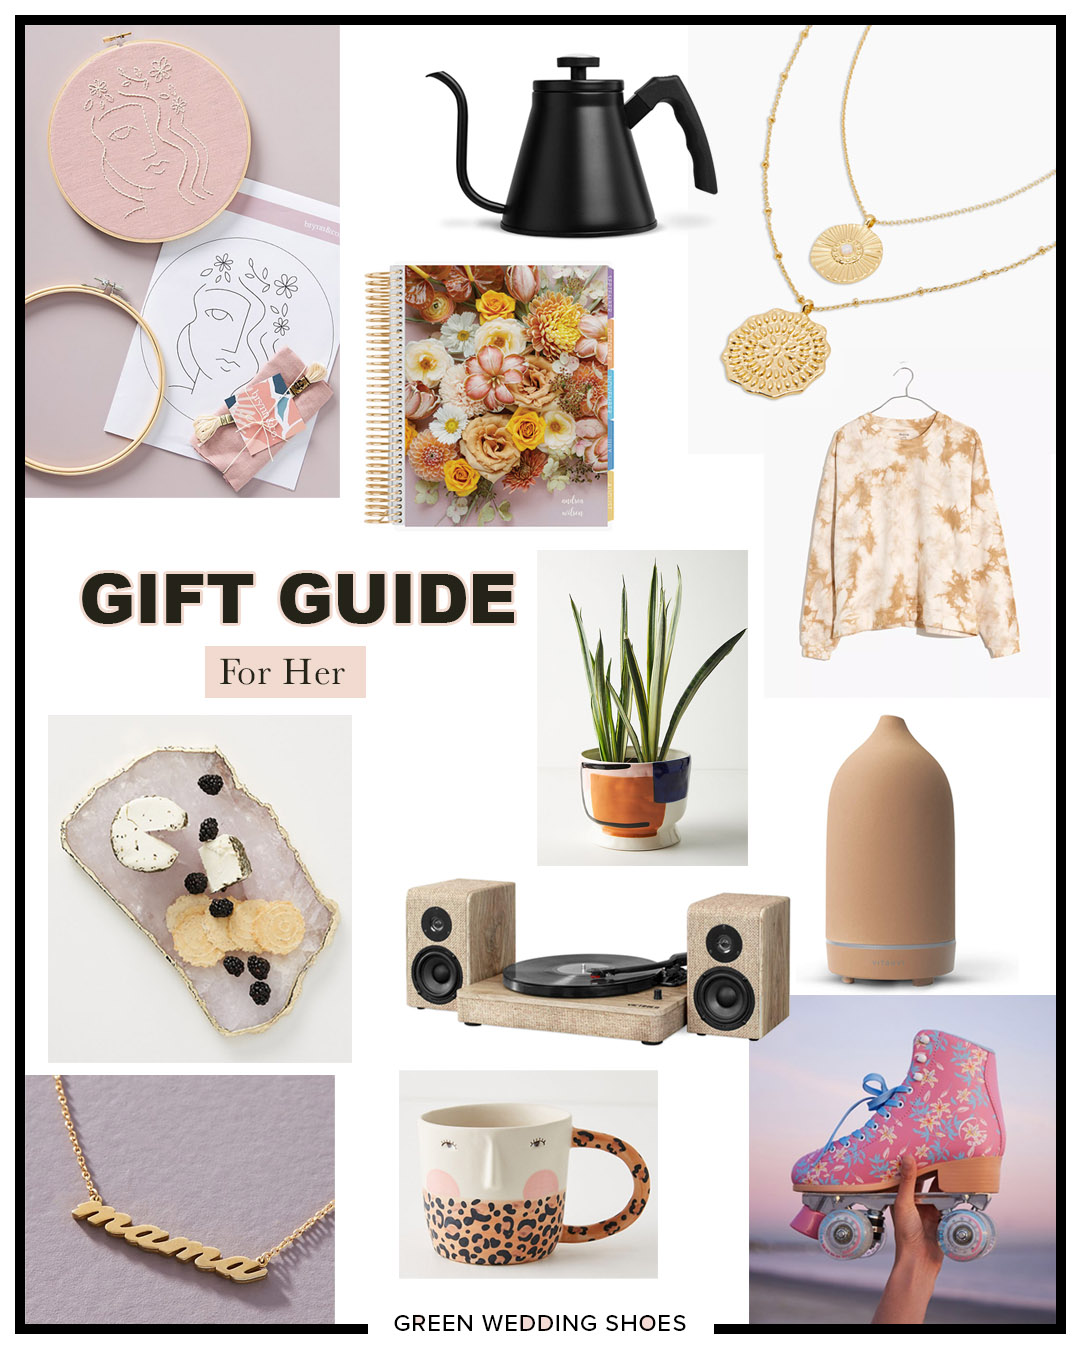 2020 Gift Guide for Her